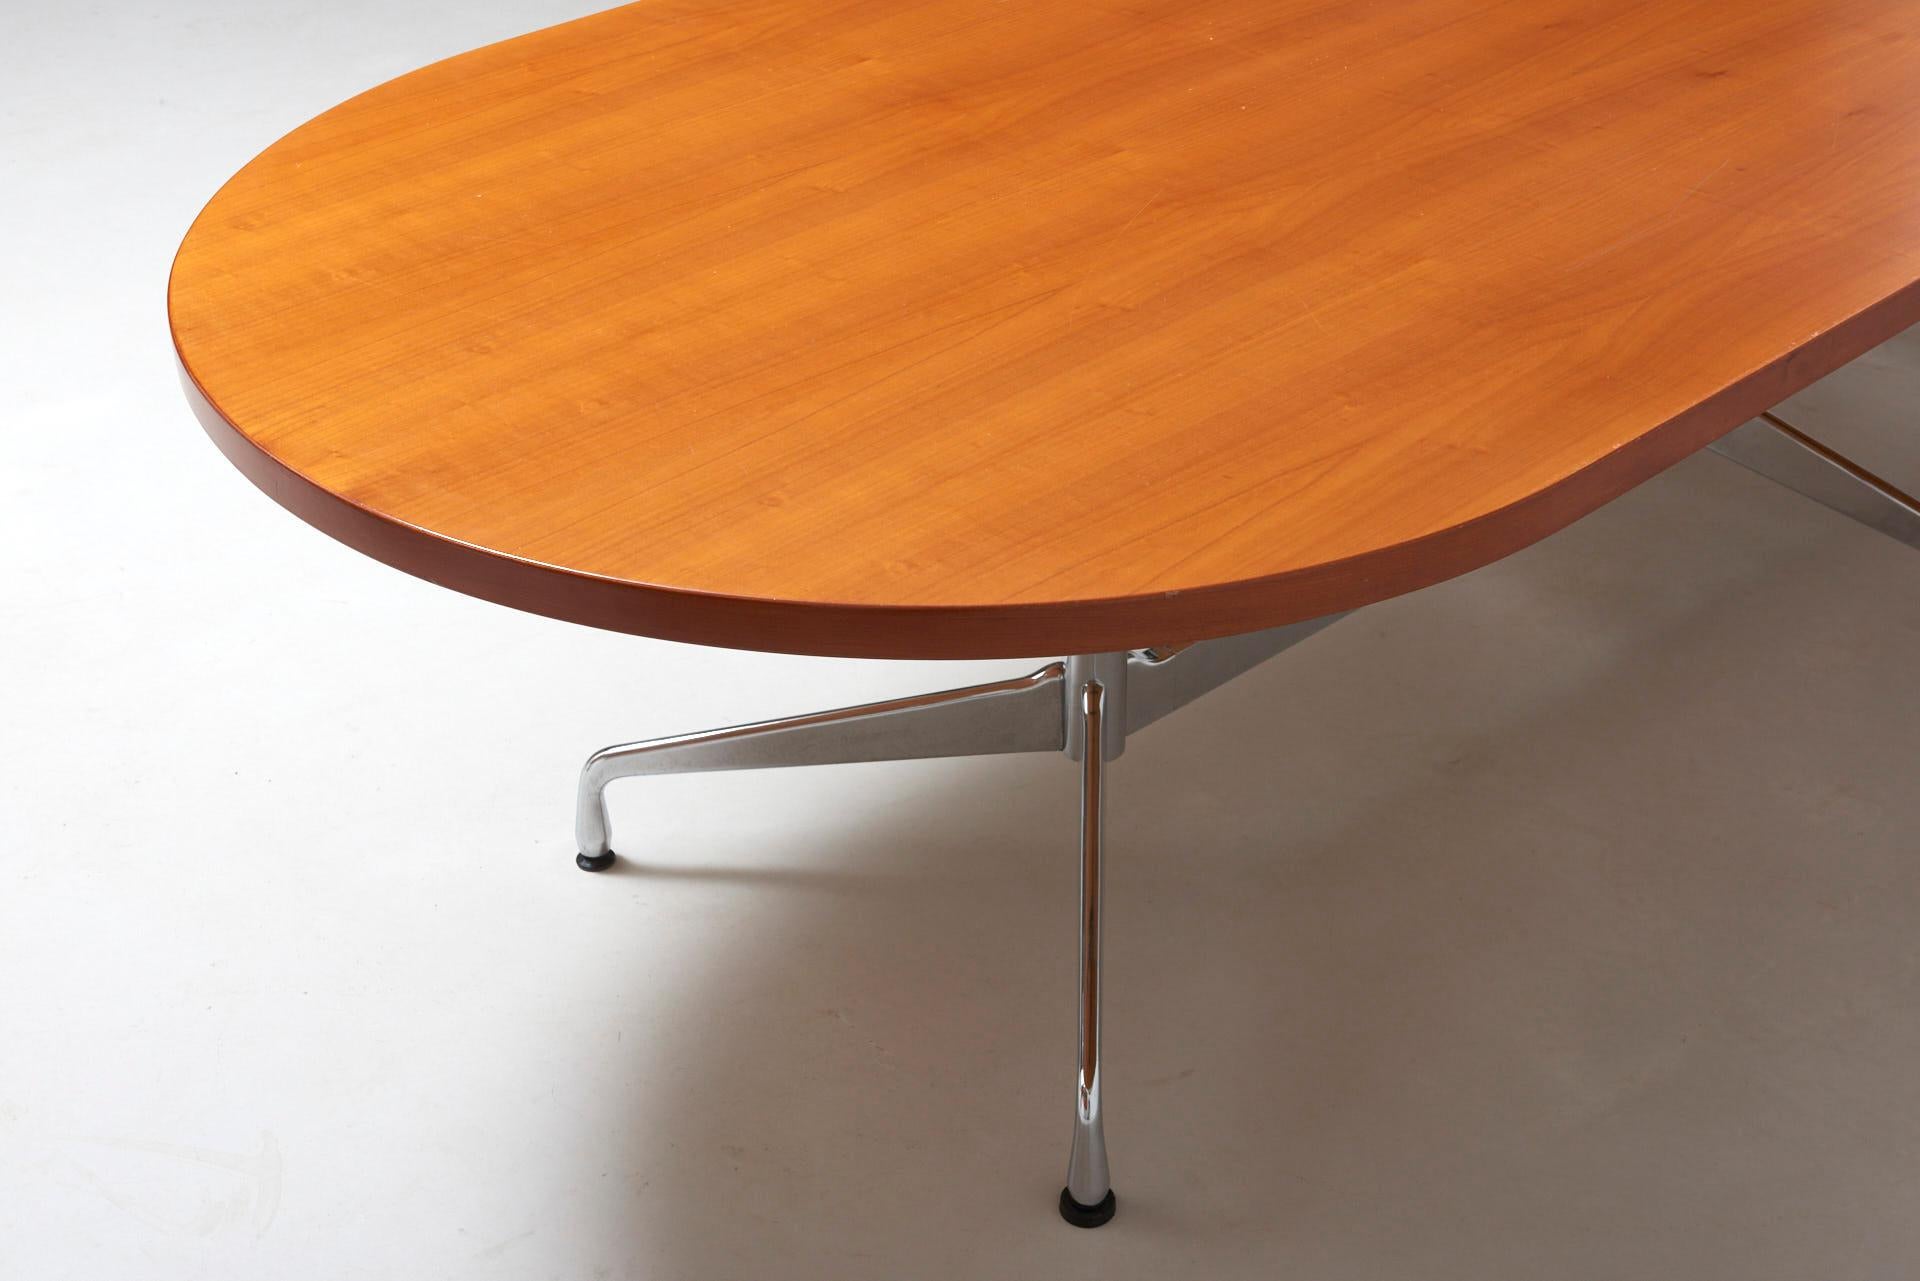 20th Century Extra Large Segmented Base table, by Charles & Ray Eames